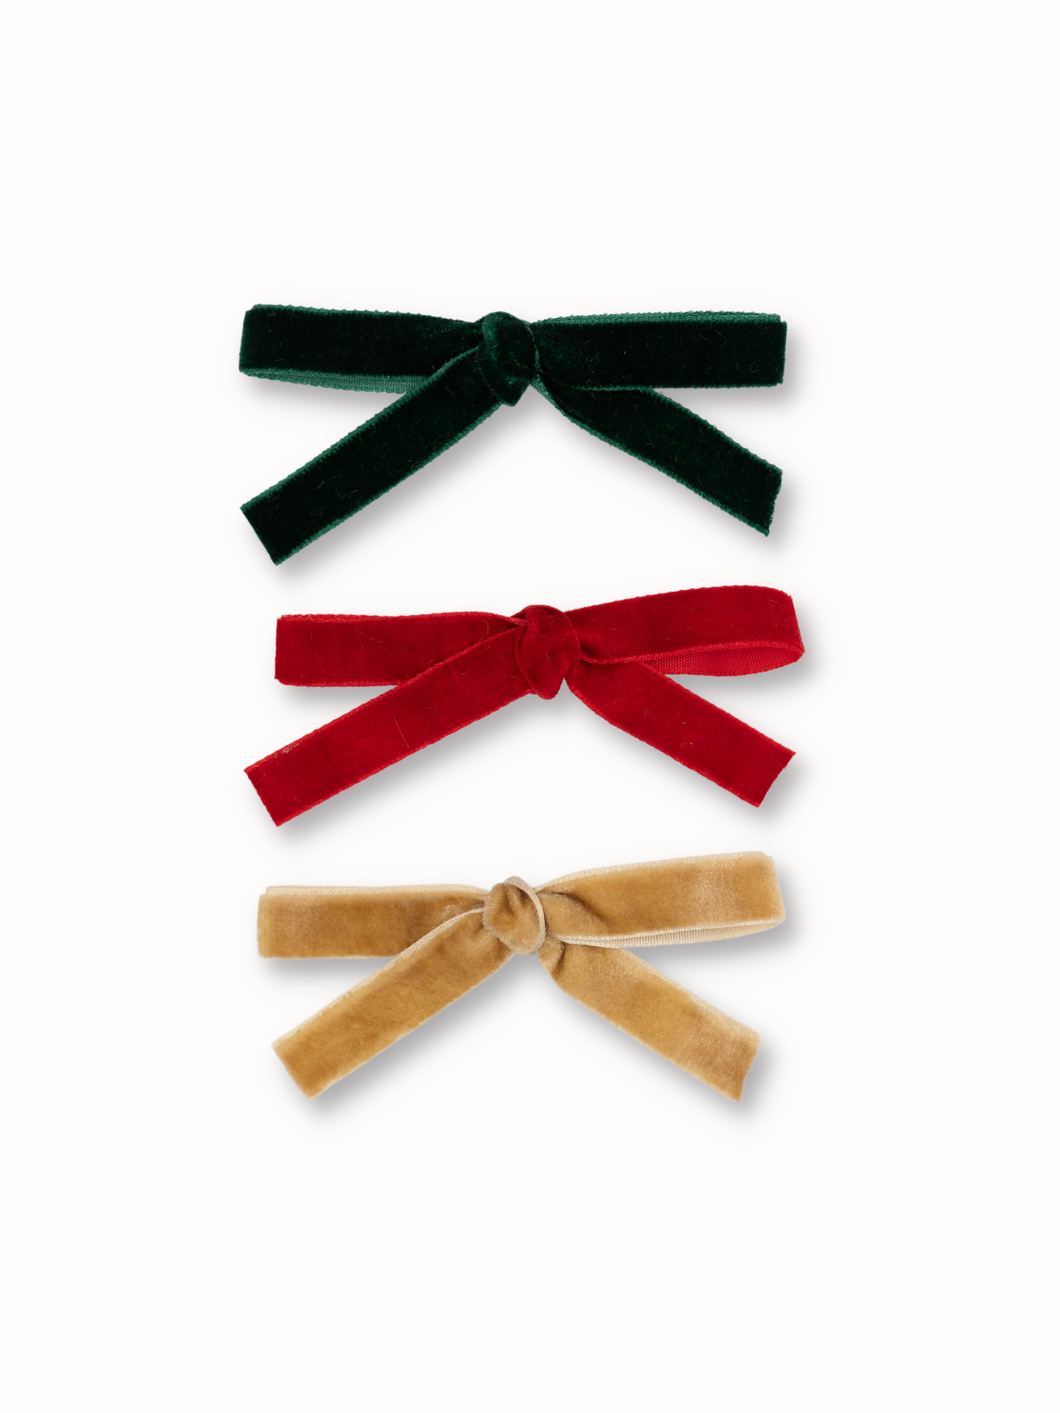 Green, Red, and Gold Mini Velvet Bows 3 piece sets